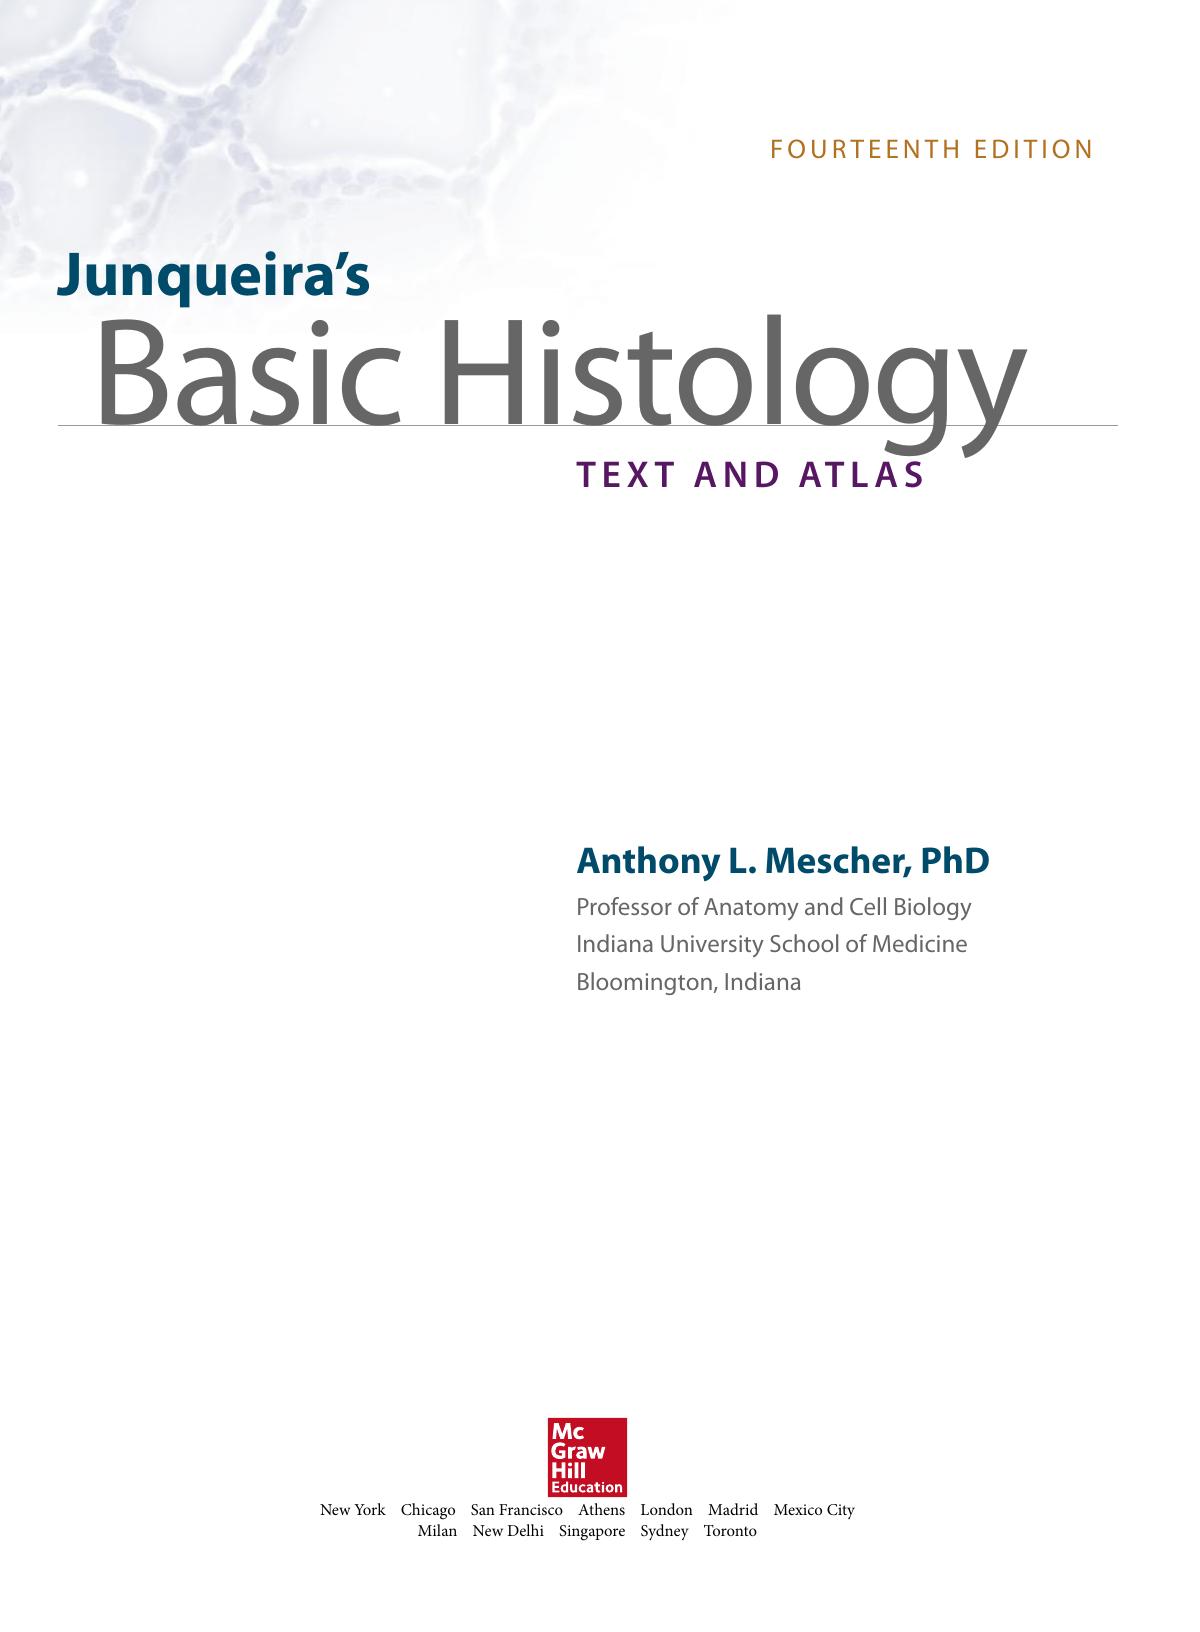 Junqueira's Basic Histology, Text and Atlas, 14th Edition